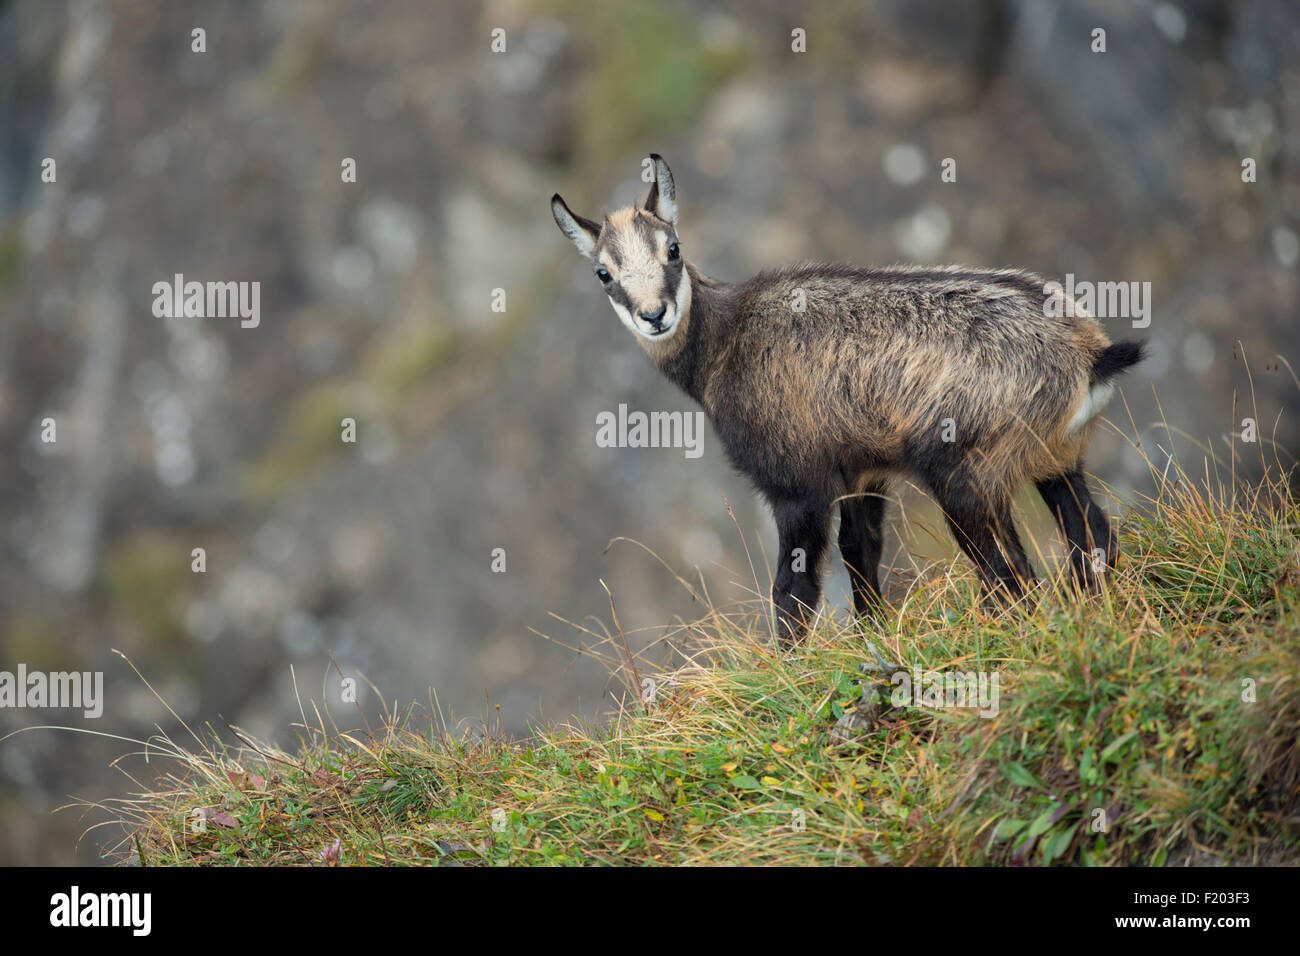 Young Rupicapra rupicapra / Chamois / Alpine chamois / Gams looking back in front of a typical background. Stock Photo